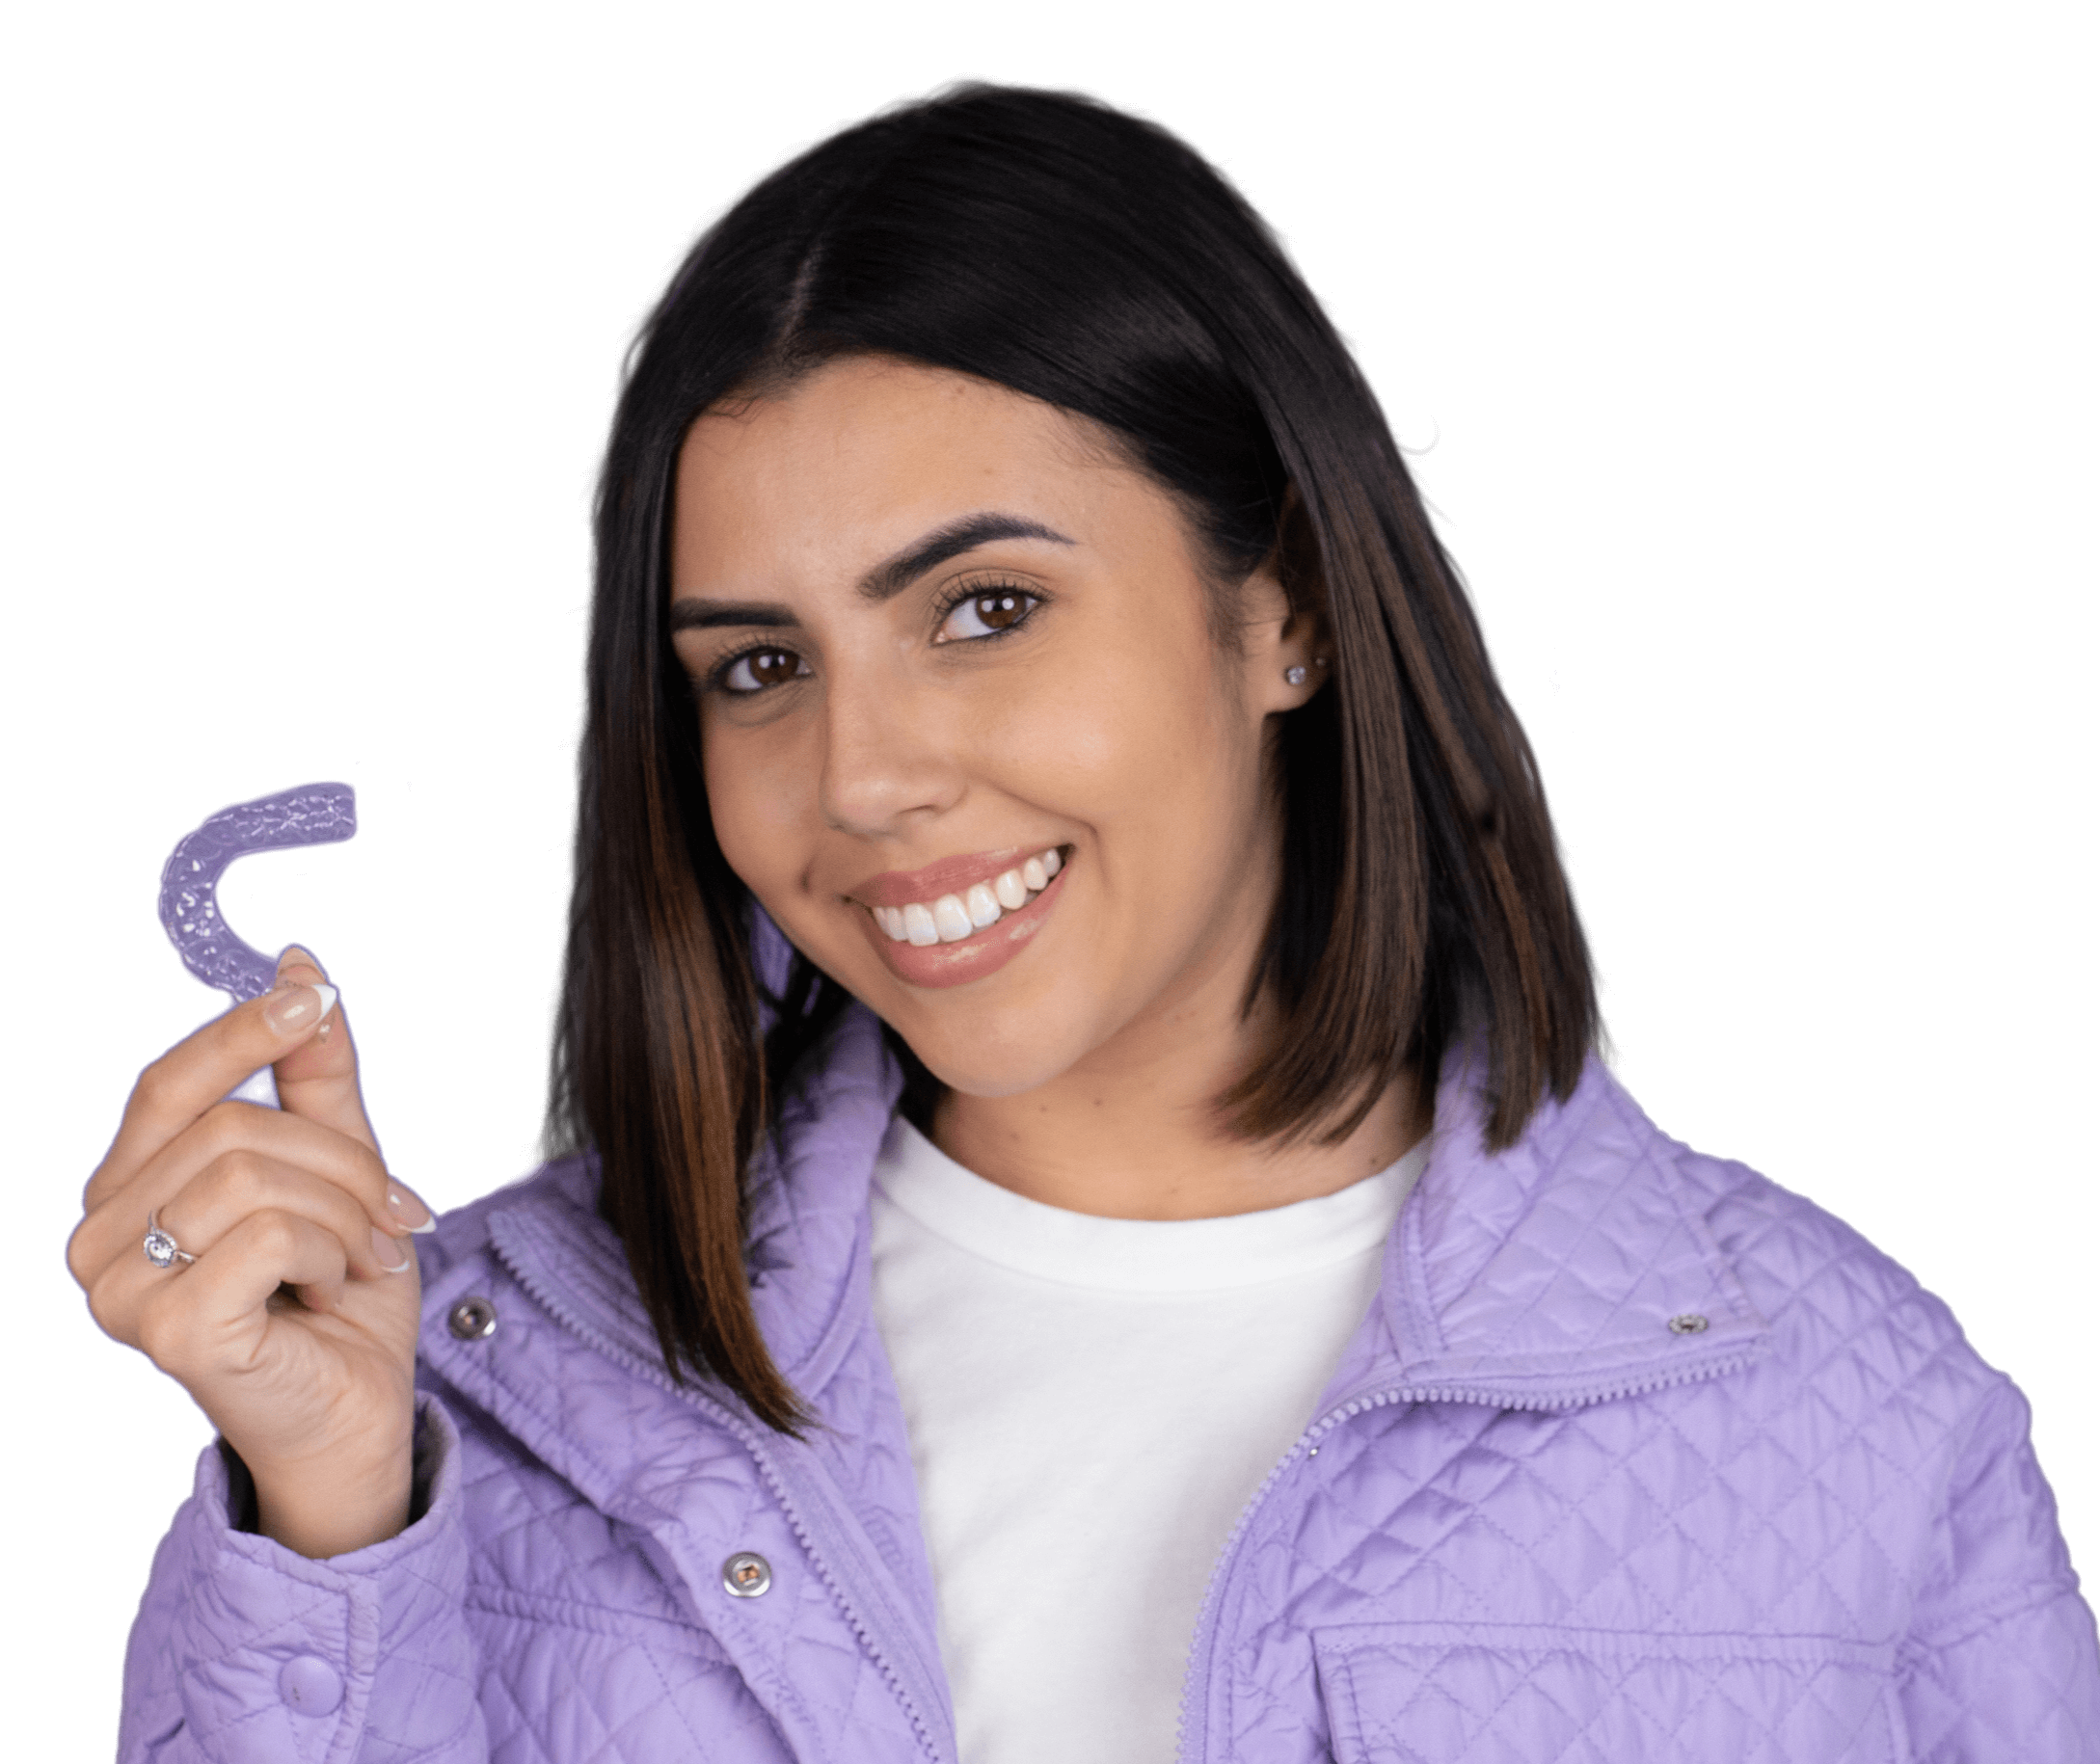 Young woman smiling and holding Virtuoso clear aligners